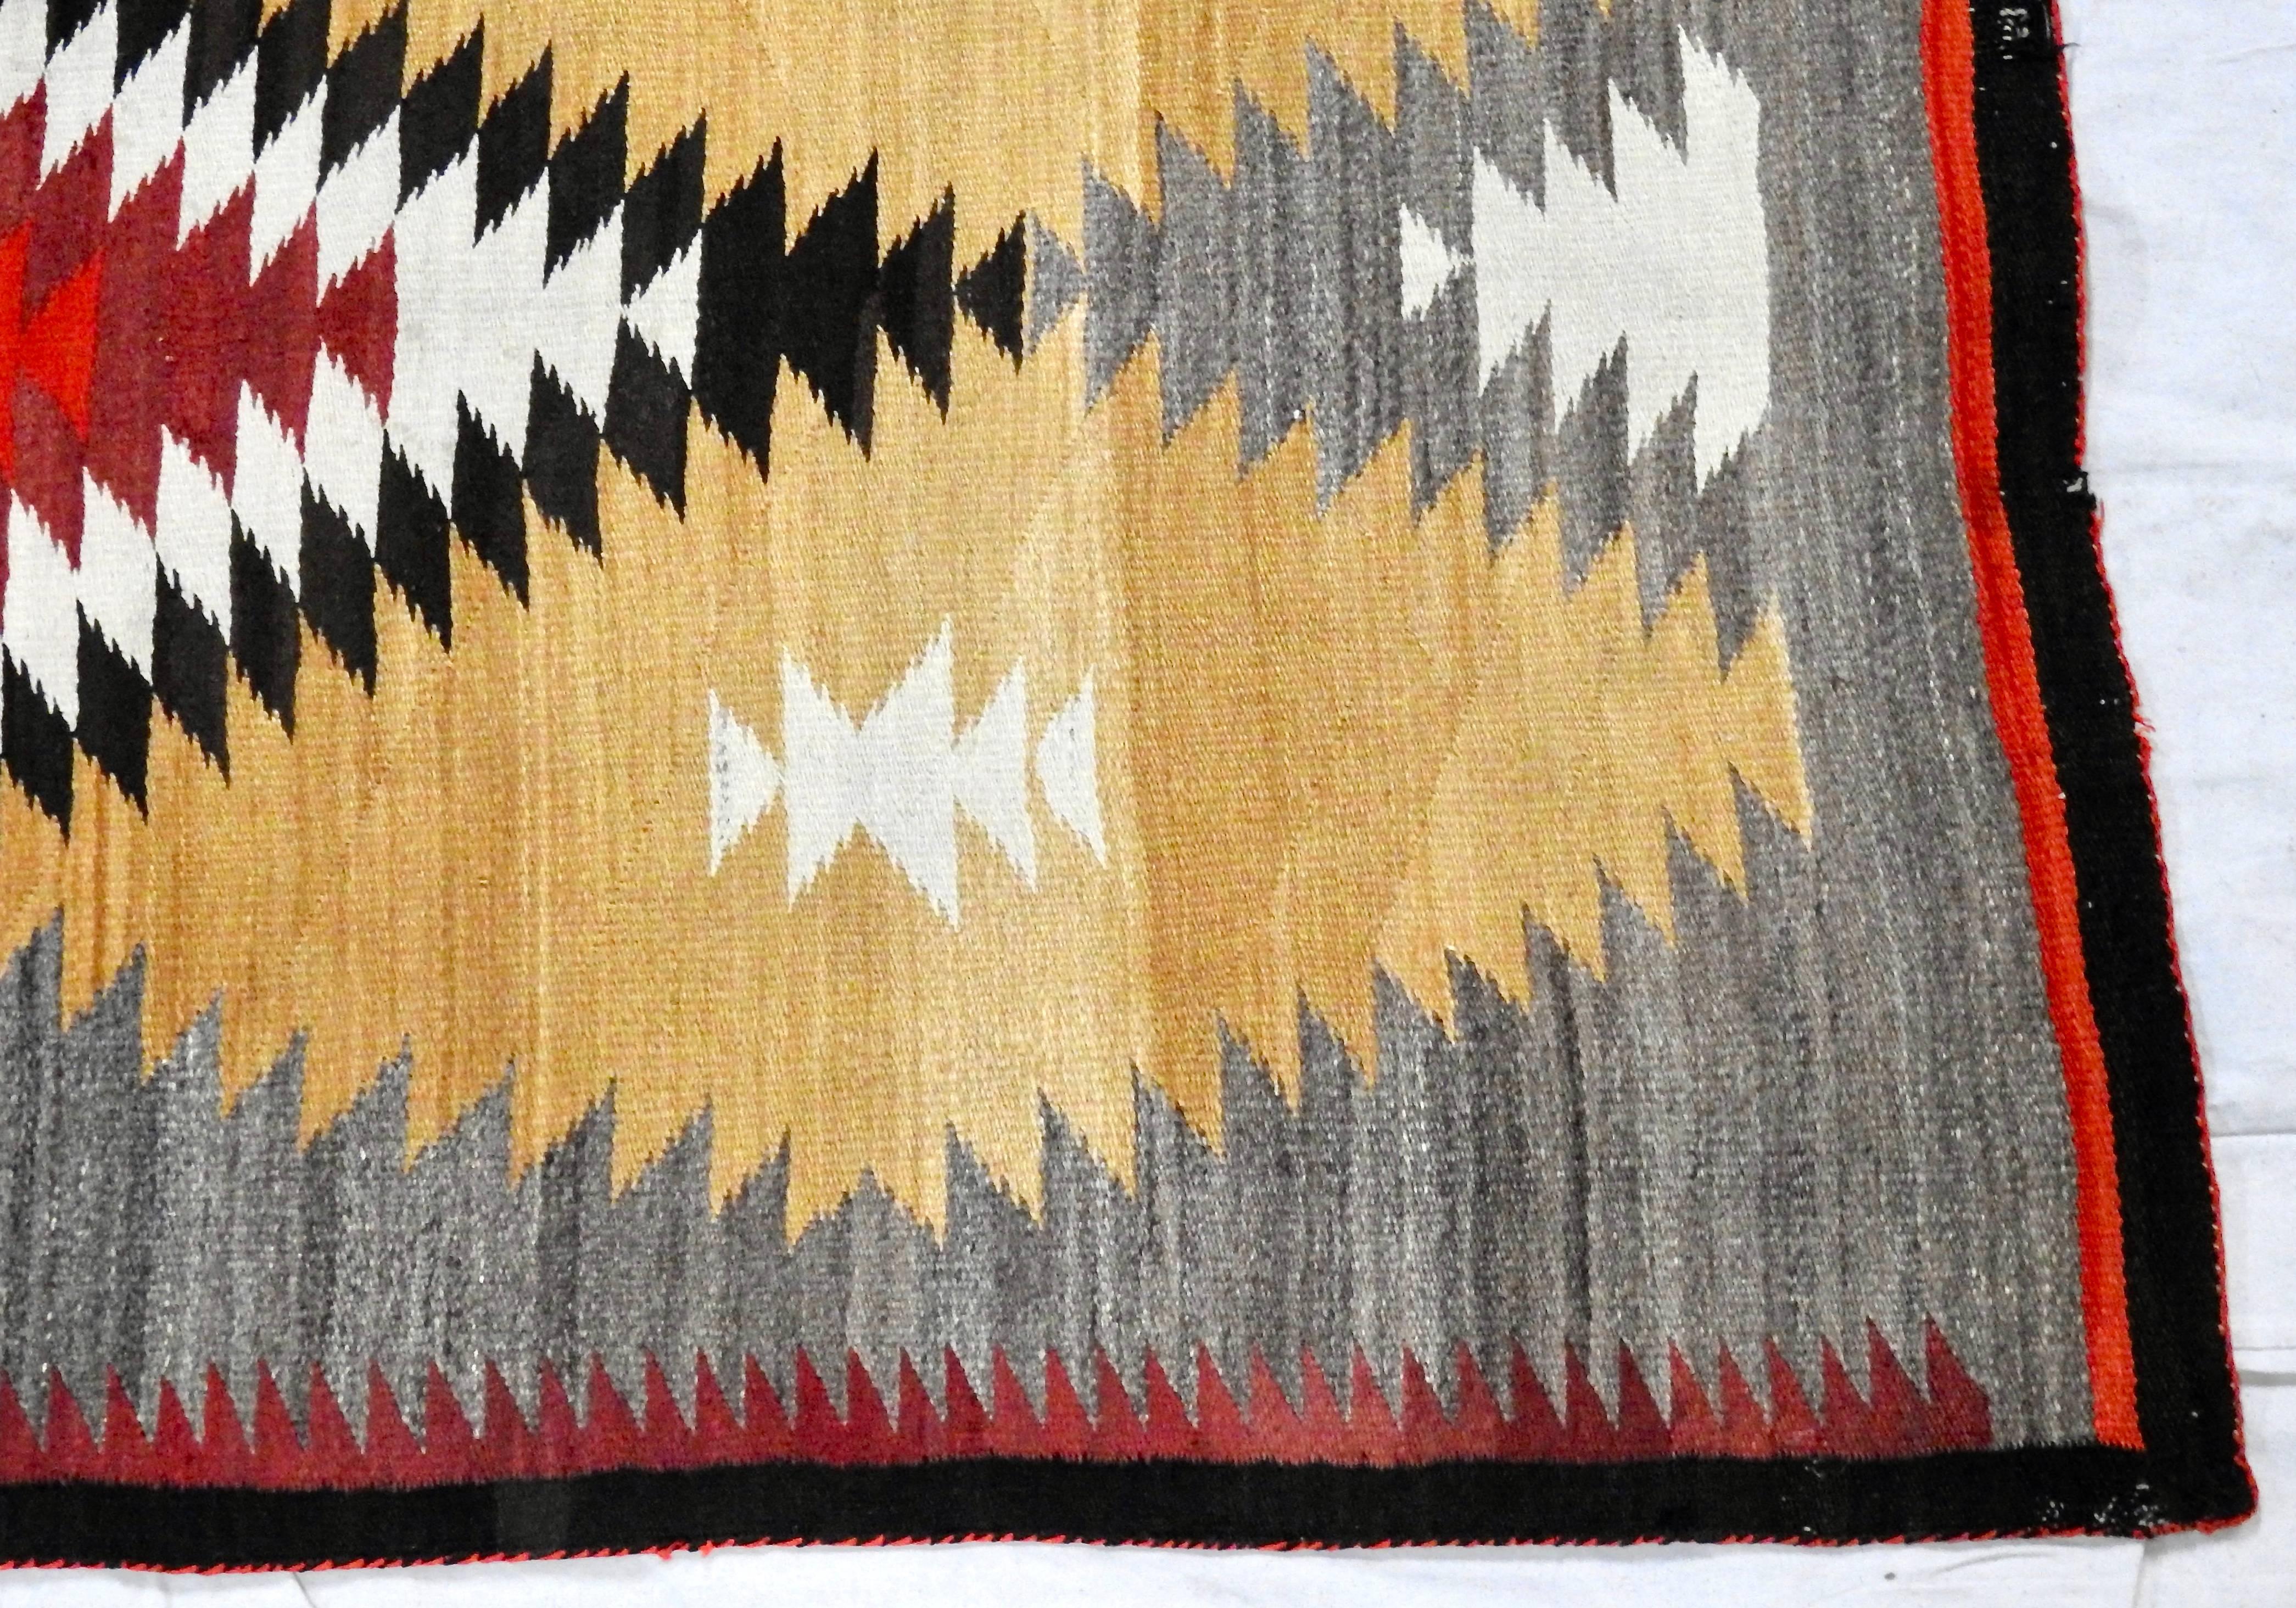 Featured is a classic, circa 1940s regional Navajo reservation eye dazzler rug. The rug is hand loomed in gold, gray, red, black and ivory wool. The pattern displays a large, elongated diamond at the centre with half diamonds at each end with red